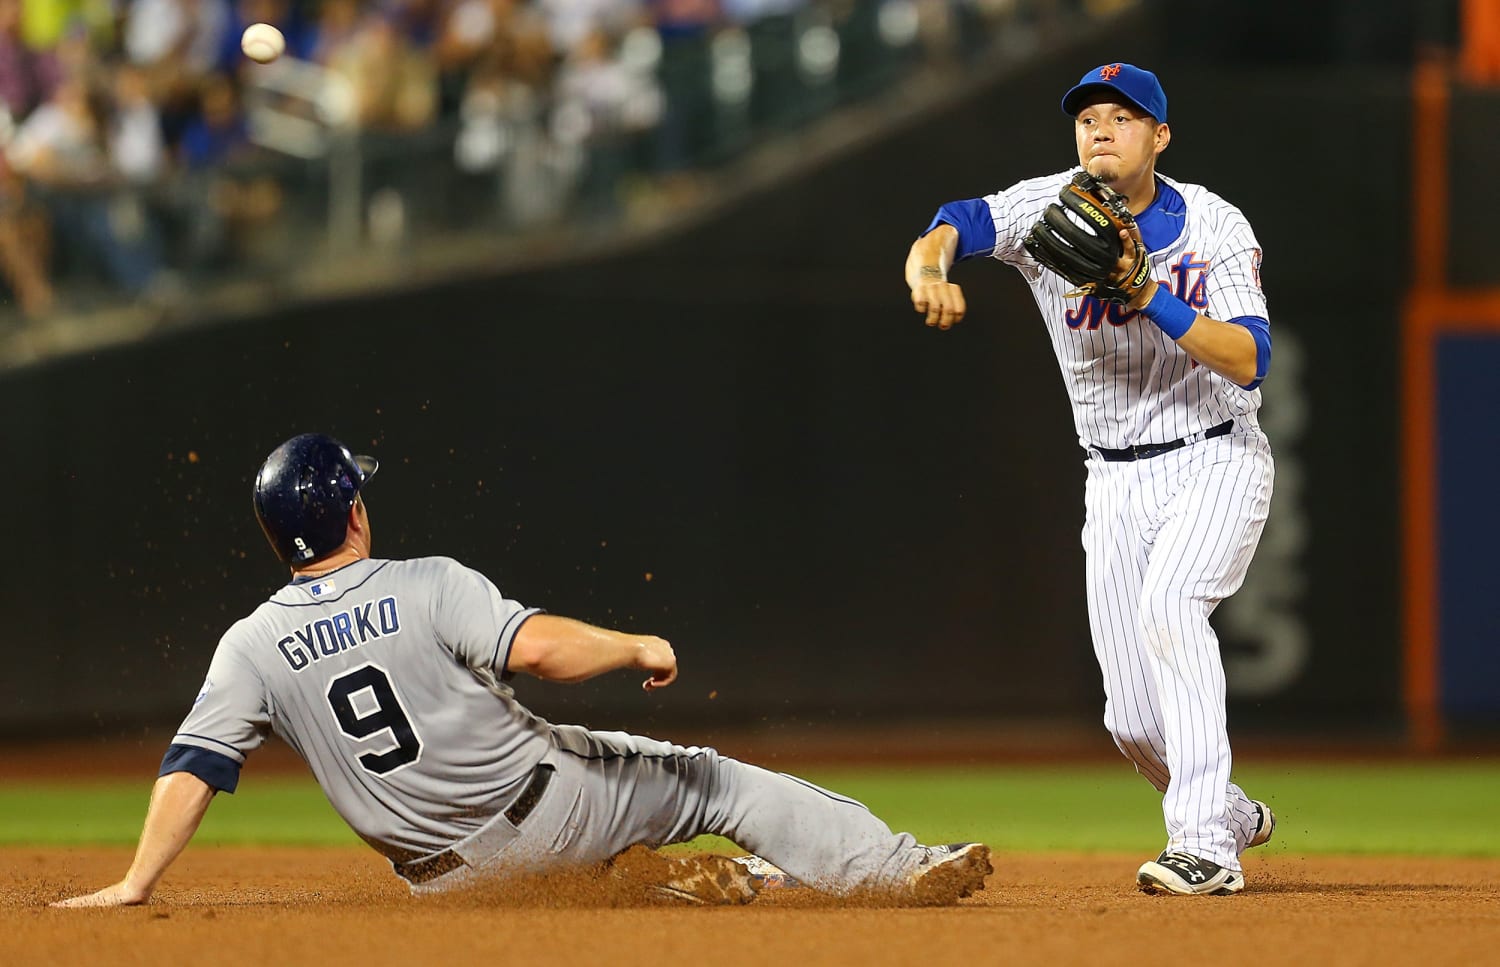 The Mets, Wilmer Flores, and the human side of baseball - Amazin' Avenue